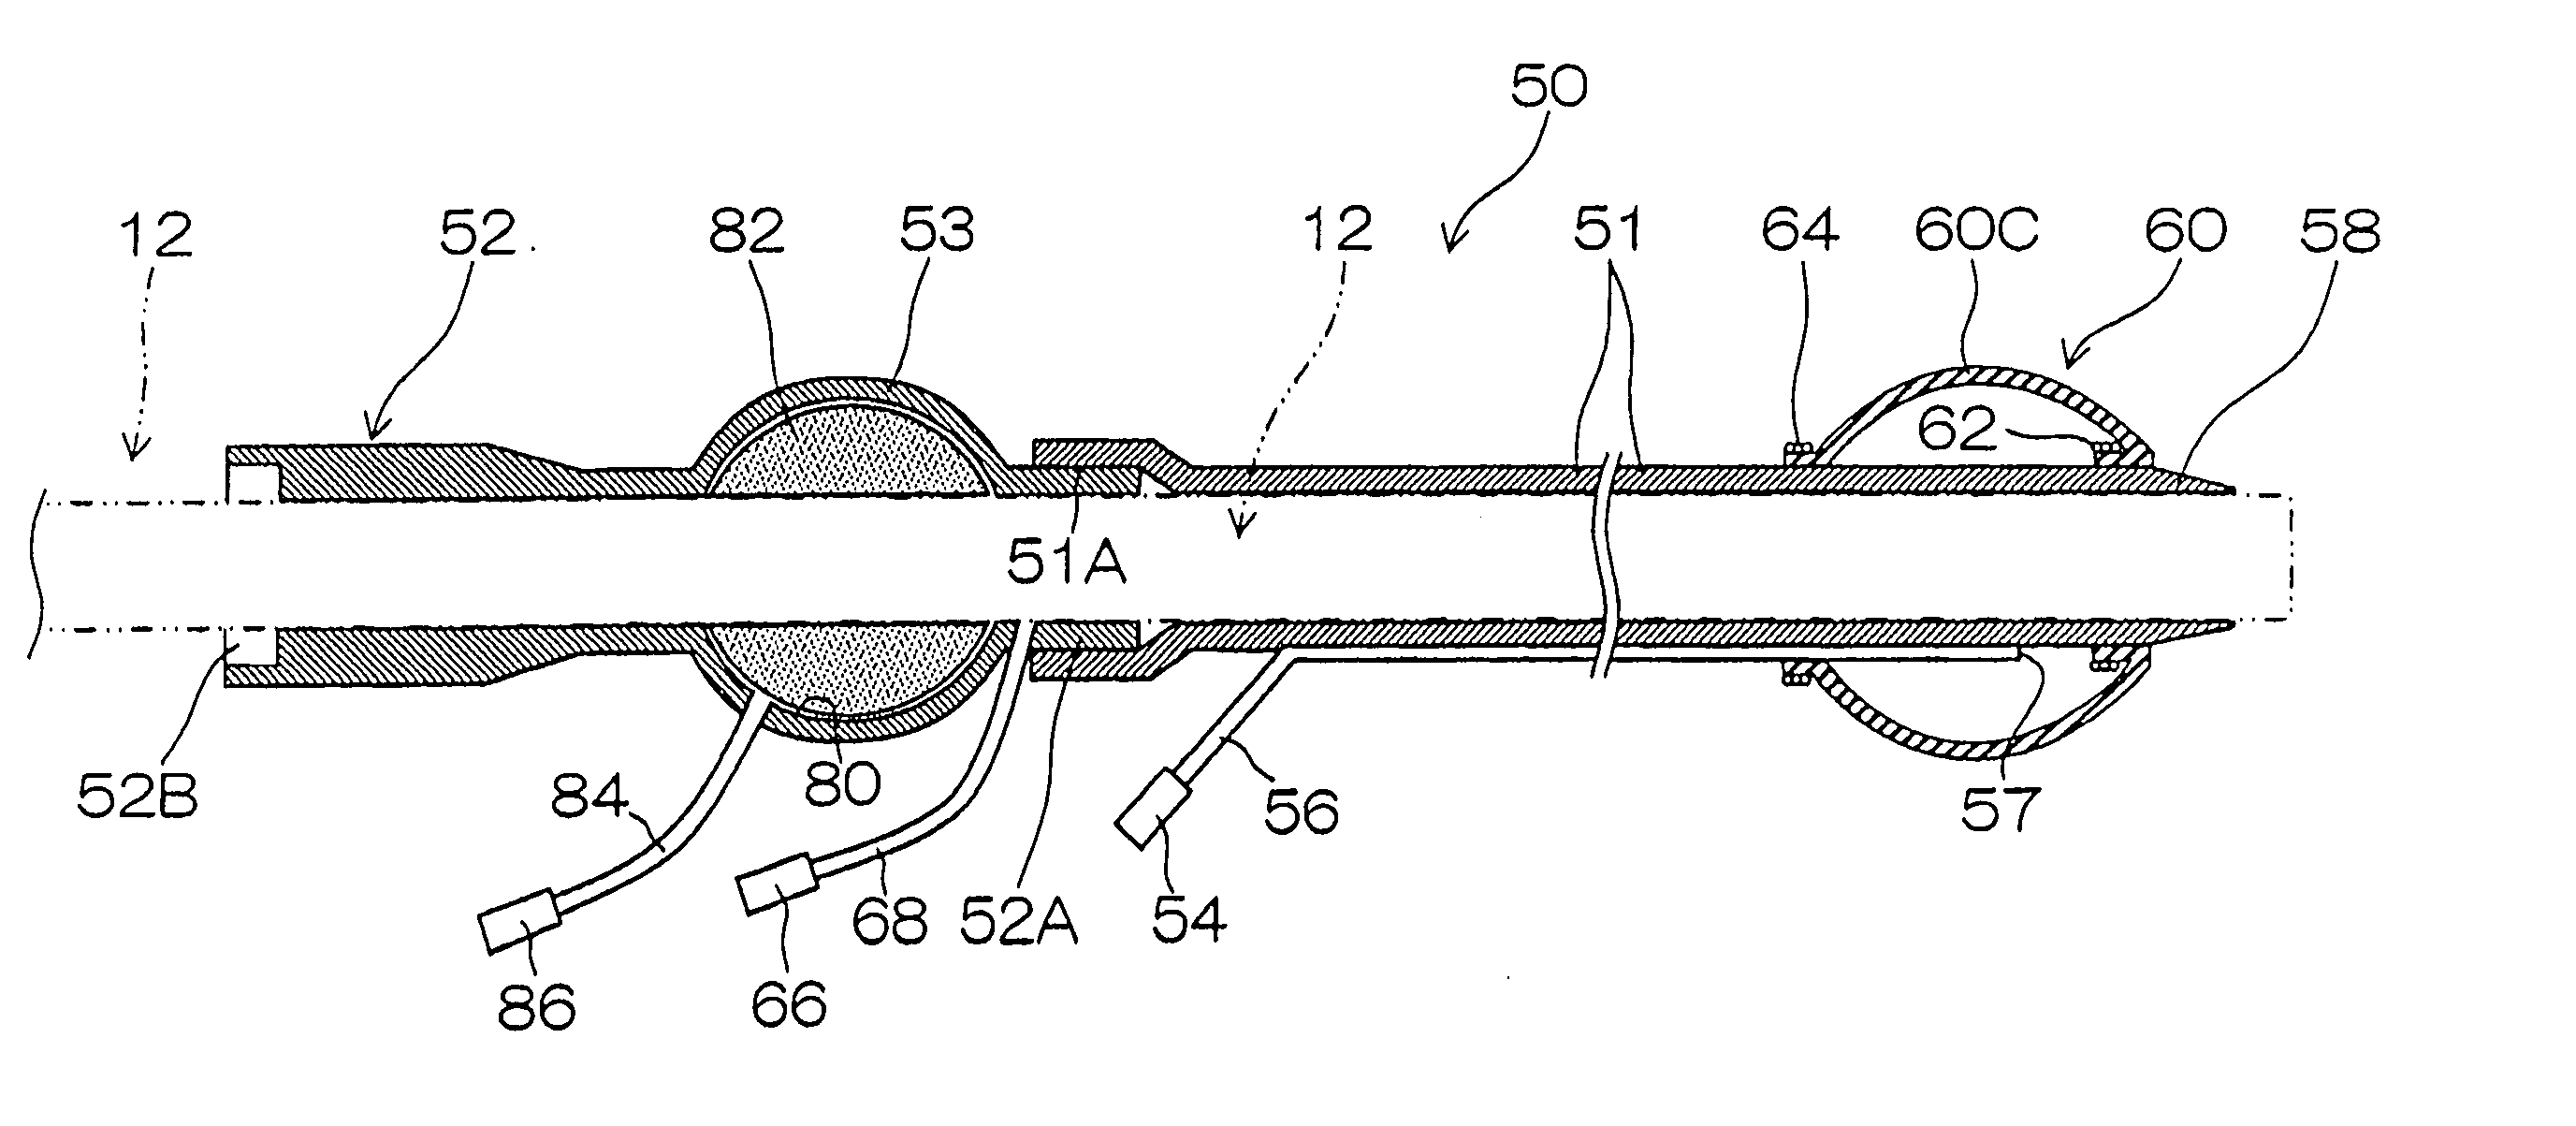 Insertion assisting tool for endoscope